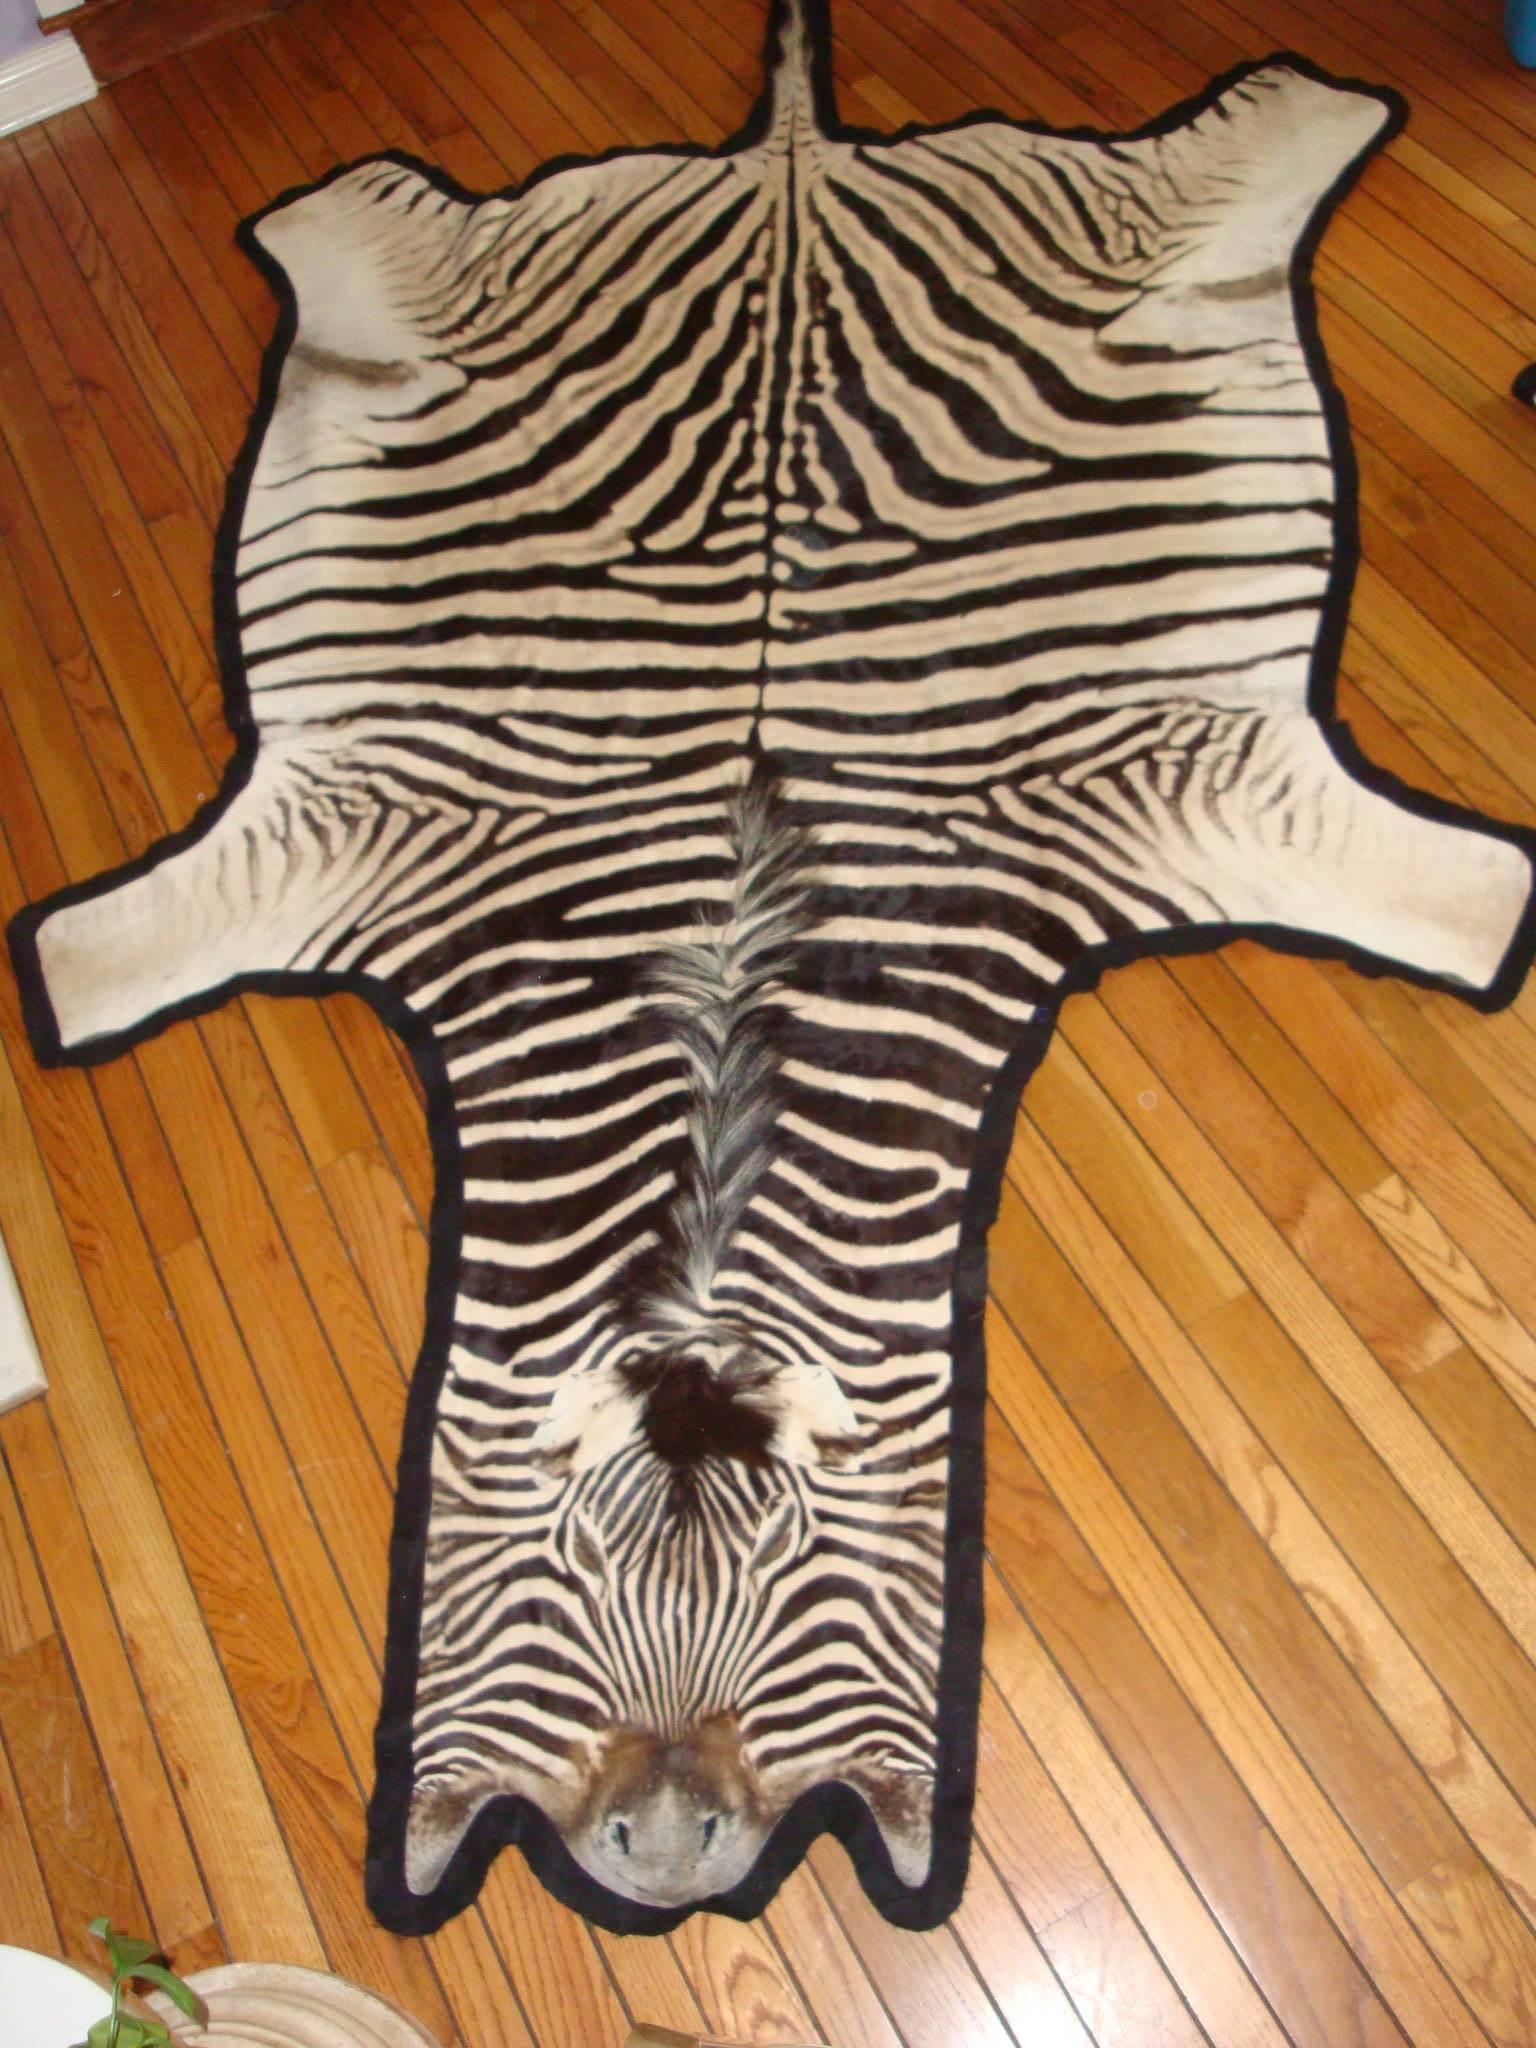 This is a Burchell Zebra from Africa. Has been felt lined and is in very good condition.